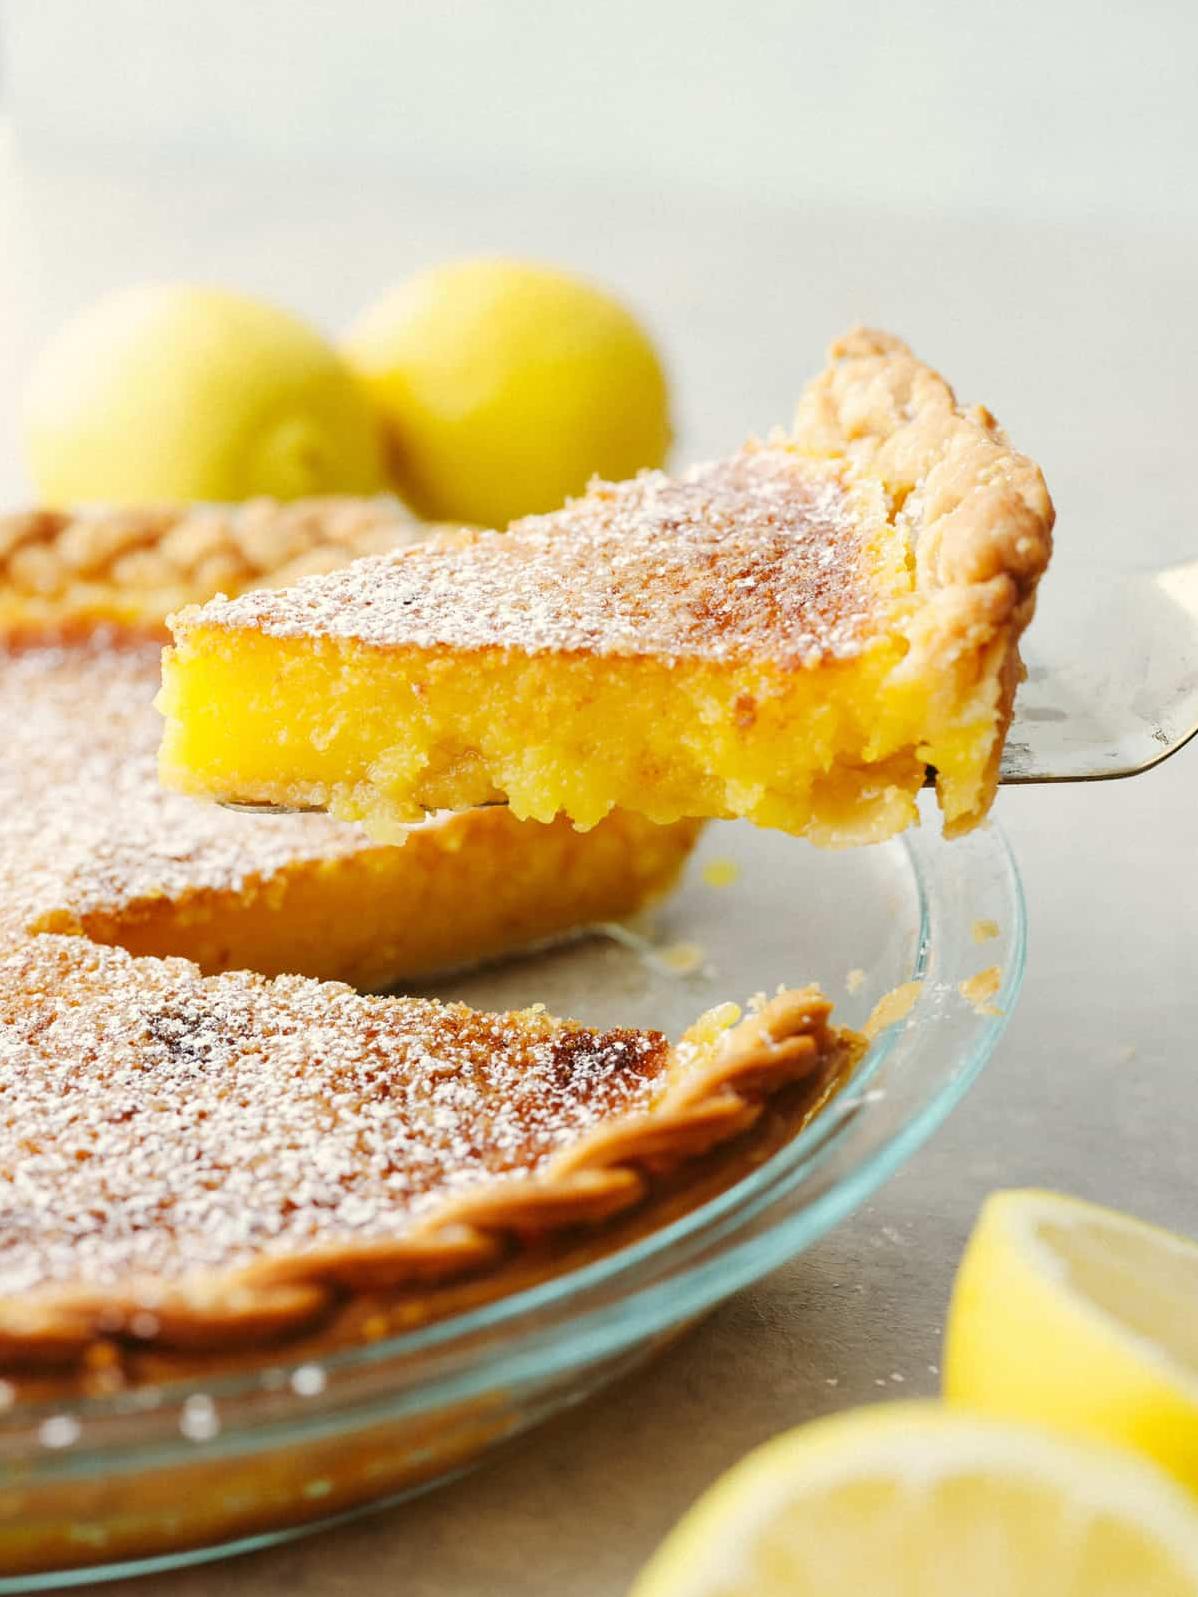  This tangy lemon chess pie is the perfect dessert for any occasion!